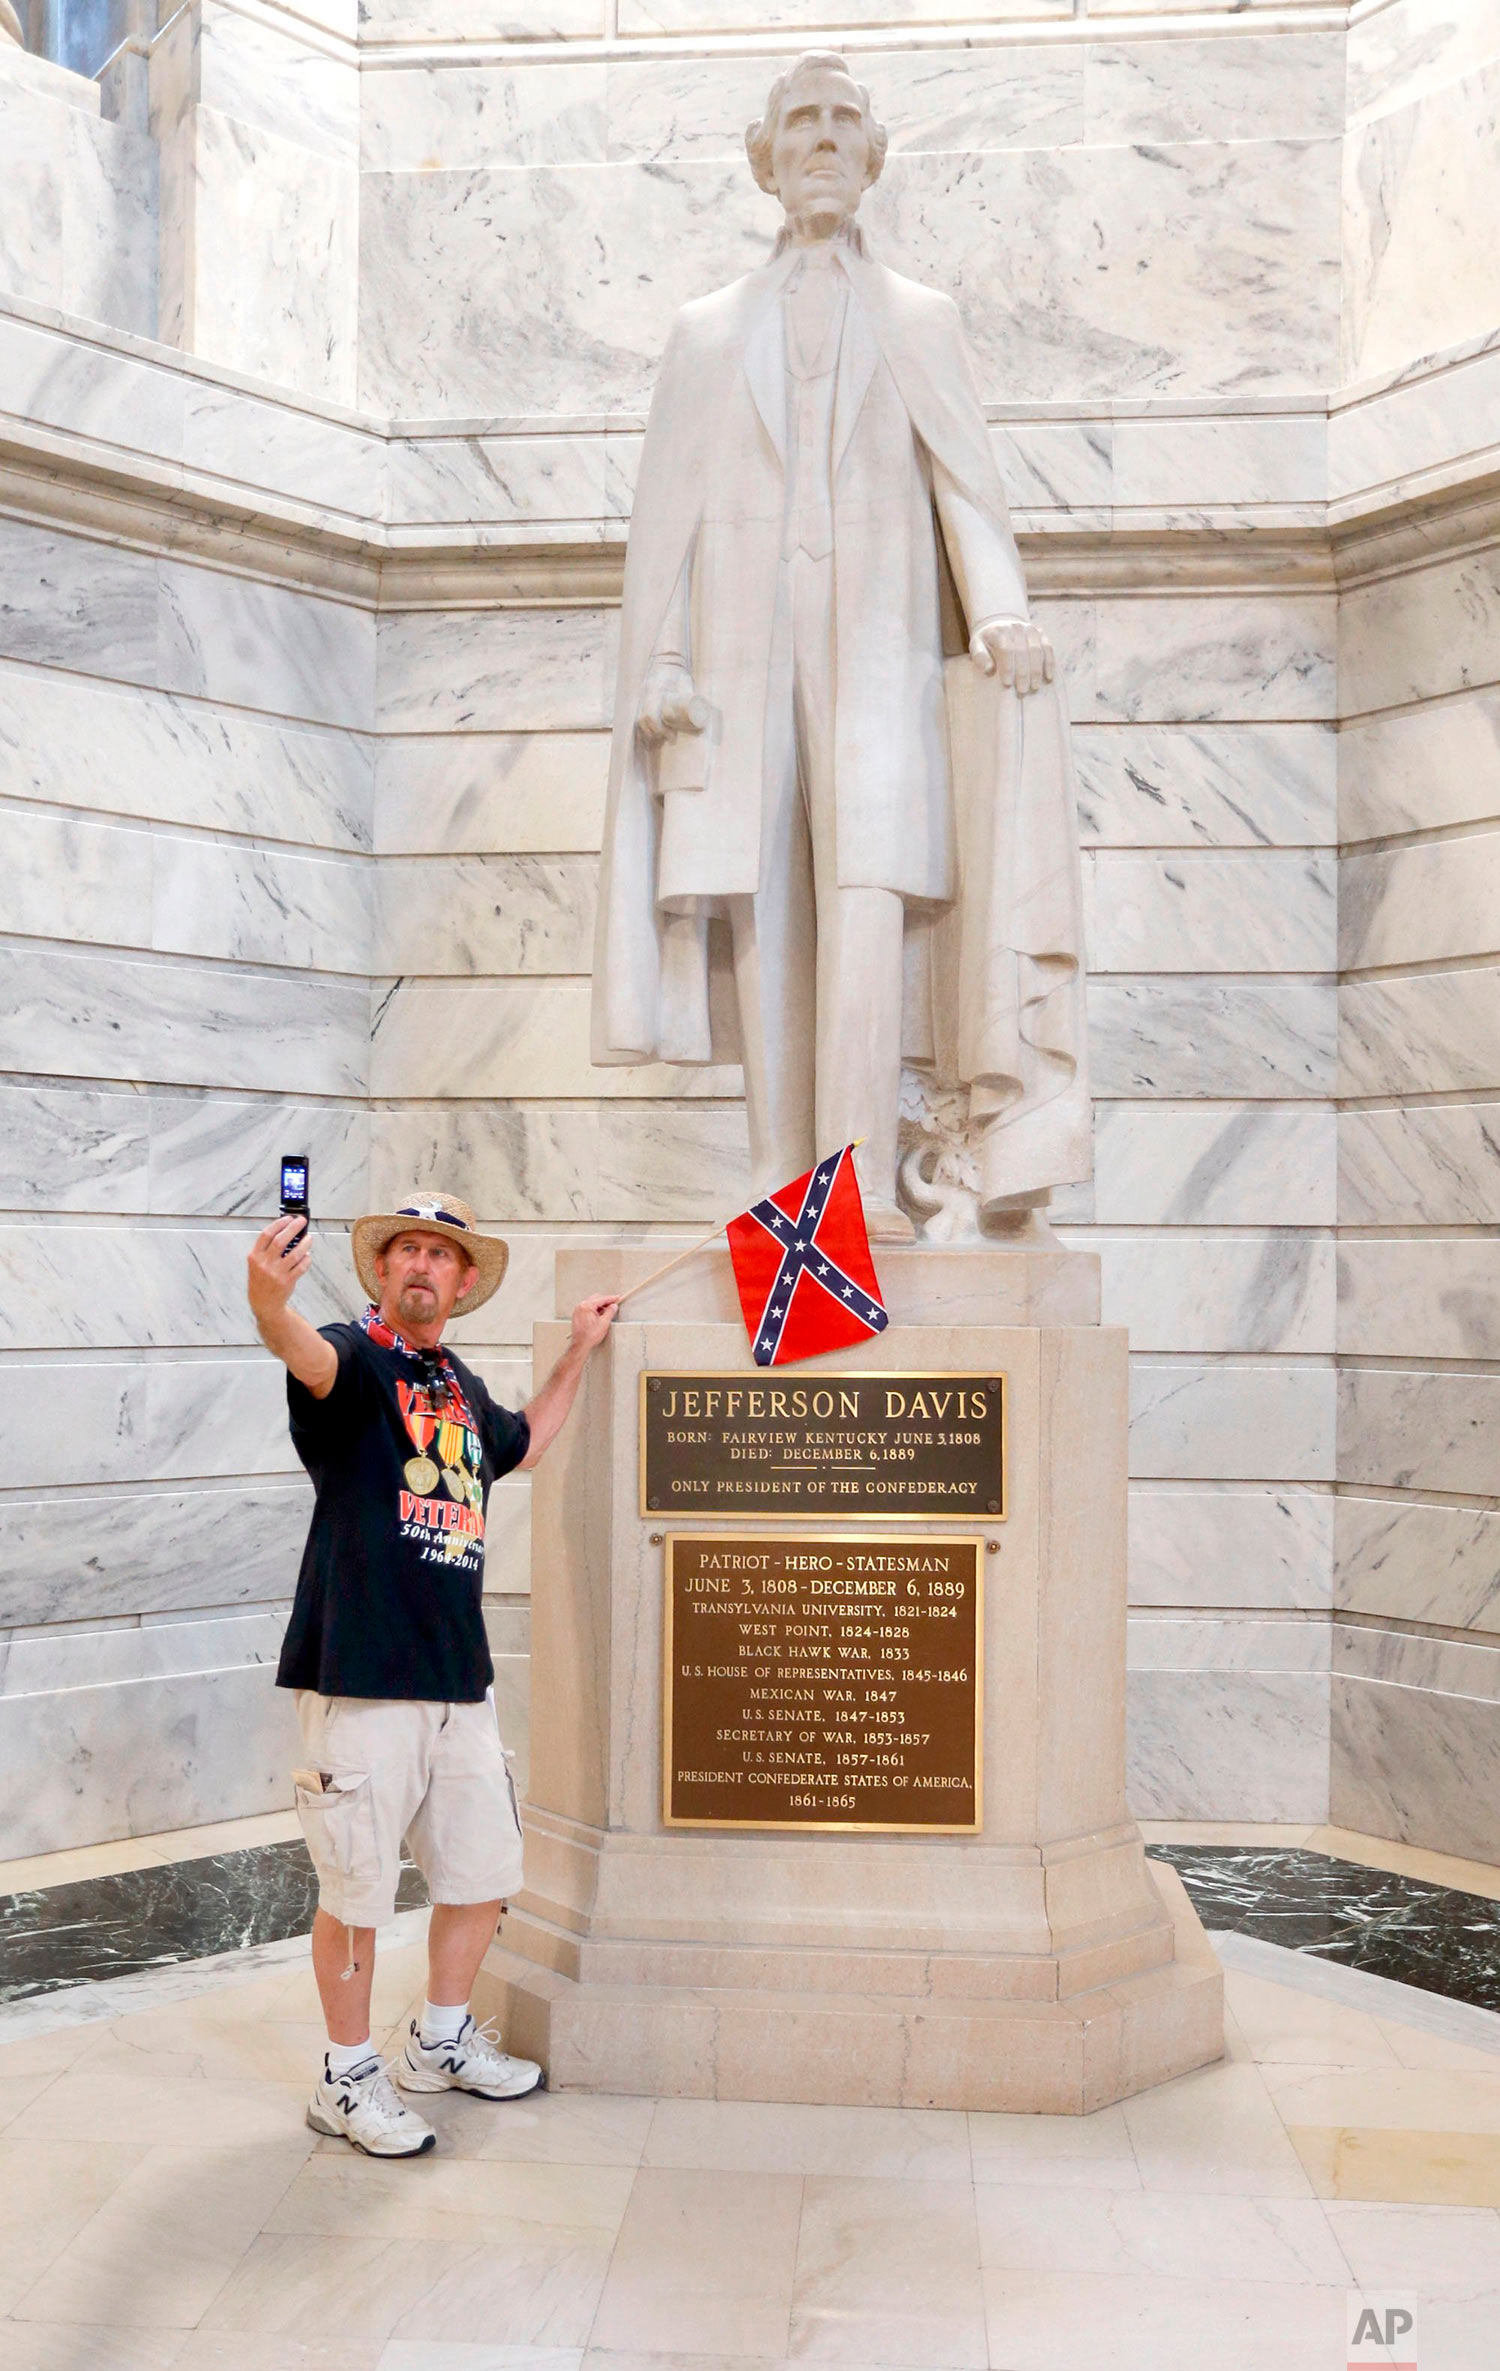  This photo taken July 24, 2017, shows James Hendrickson, Corbin, Ky., taking a "selfie" with the Jefferson Davis Statue following a rally in support of keeping the statue of Confederate president Jefferson Davis in the Capitol, held on the steps of 